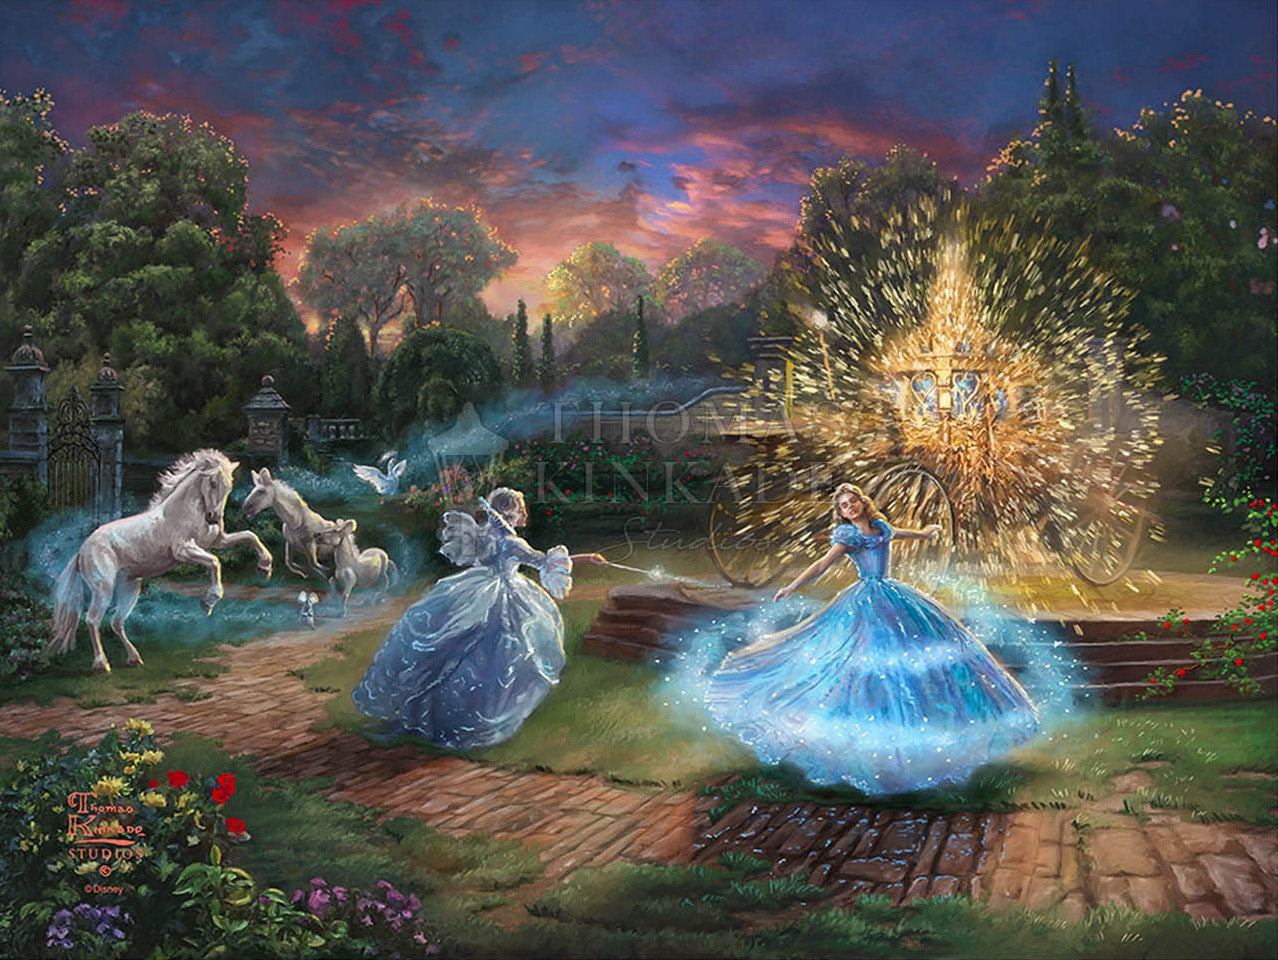 Thomas Kinkade Disney Dreams "Wishes Granted" Limited and Open Canvas Giclee